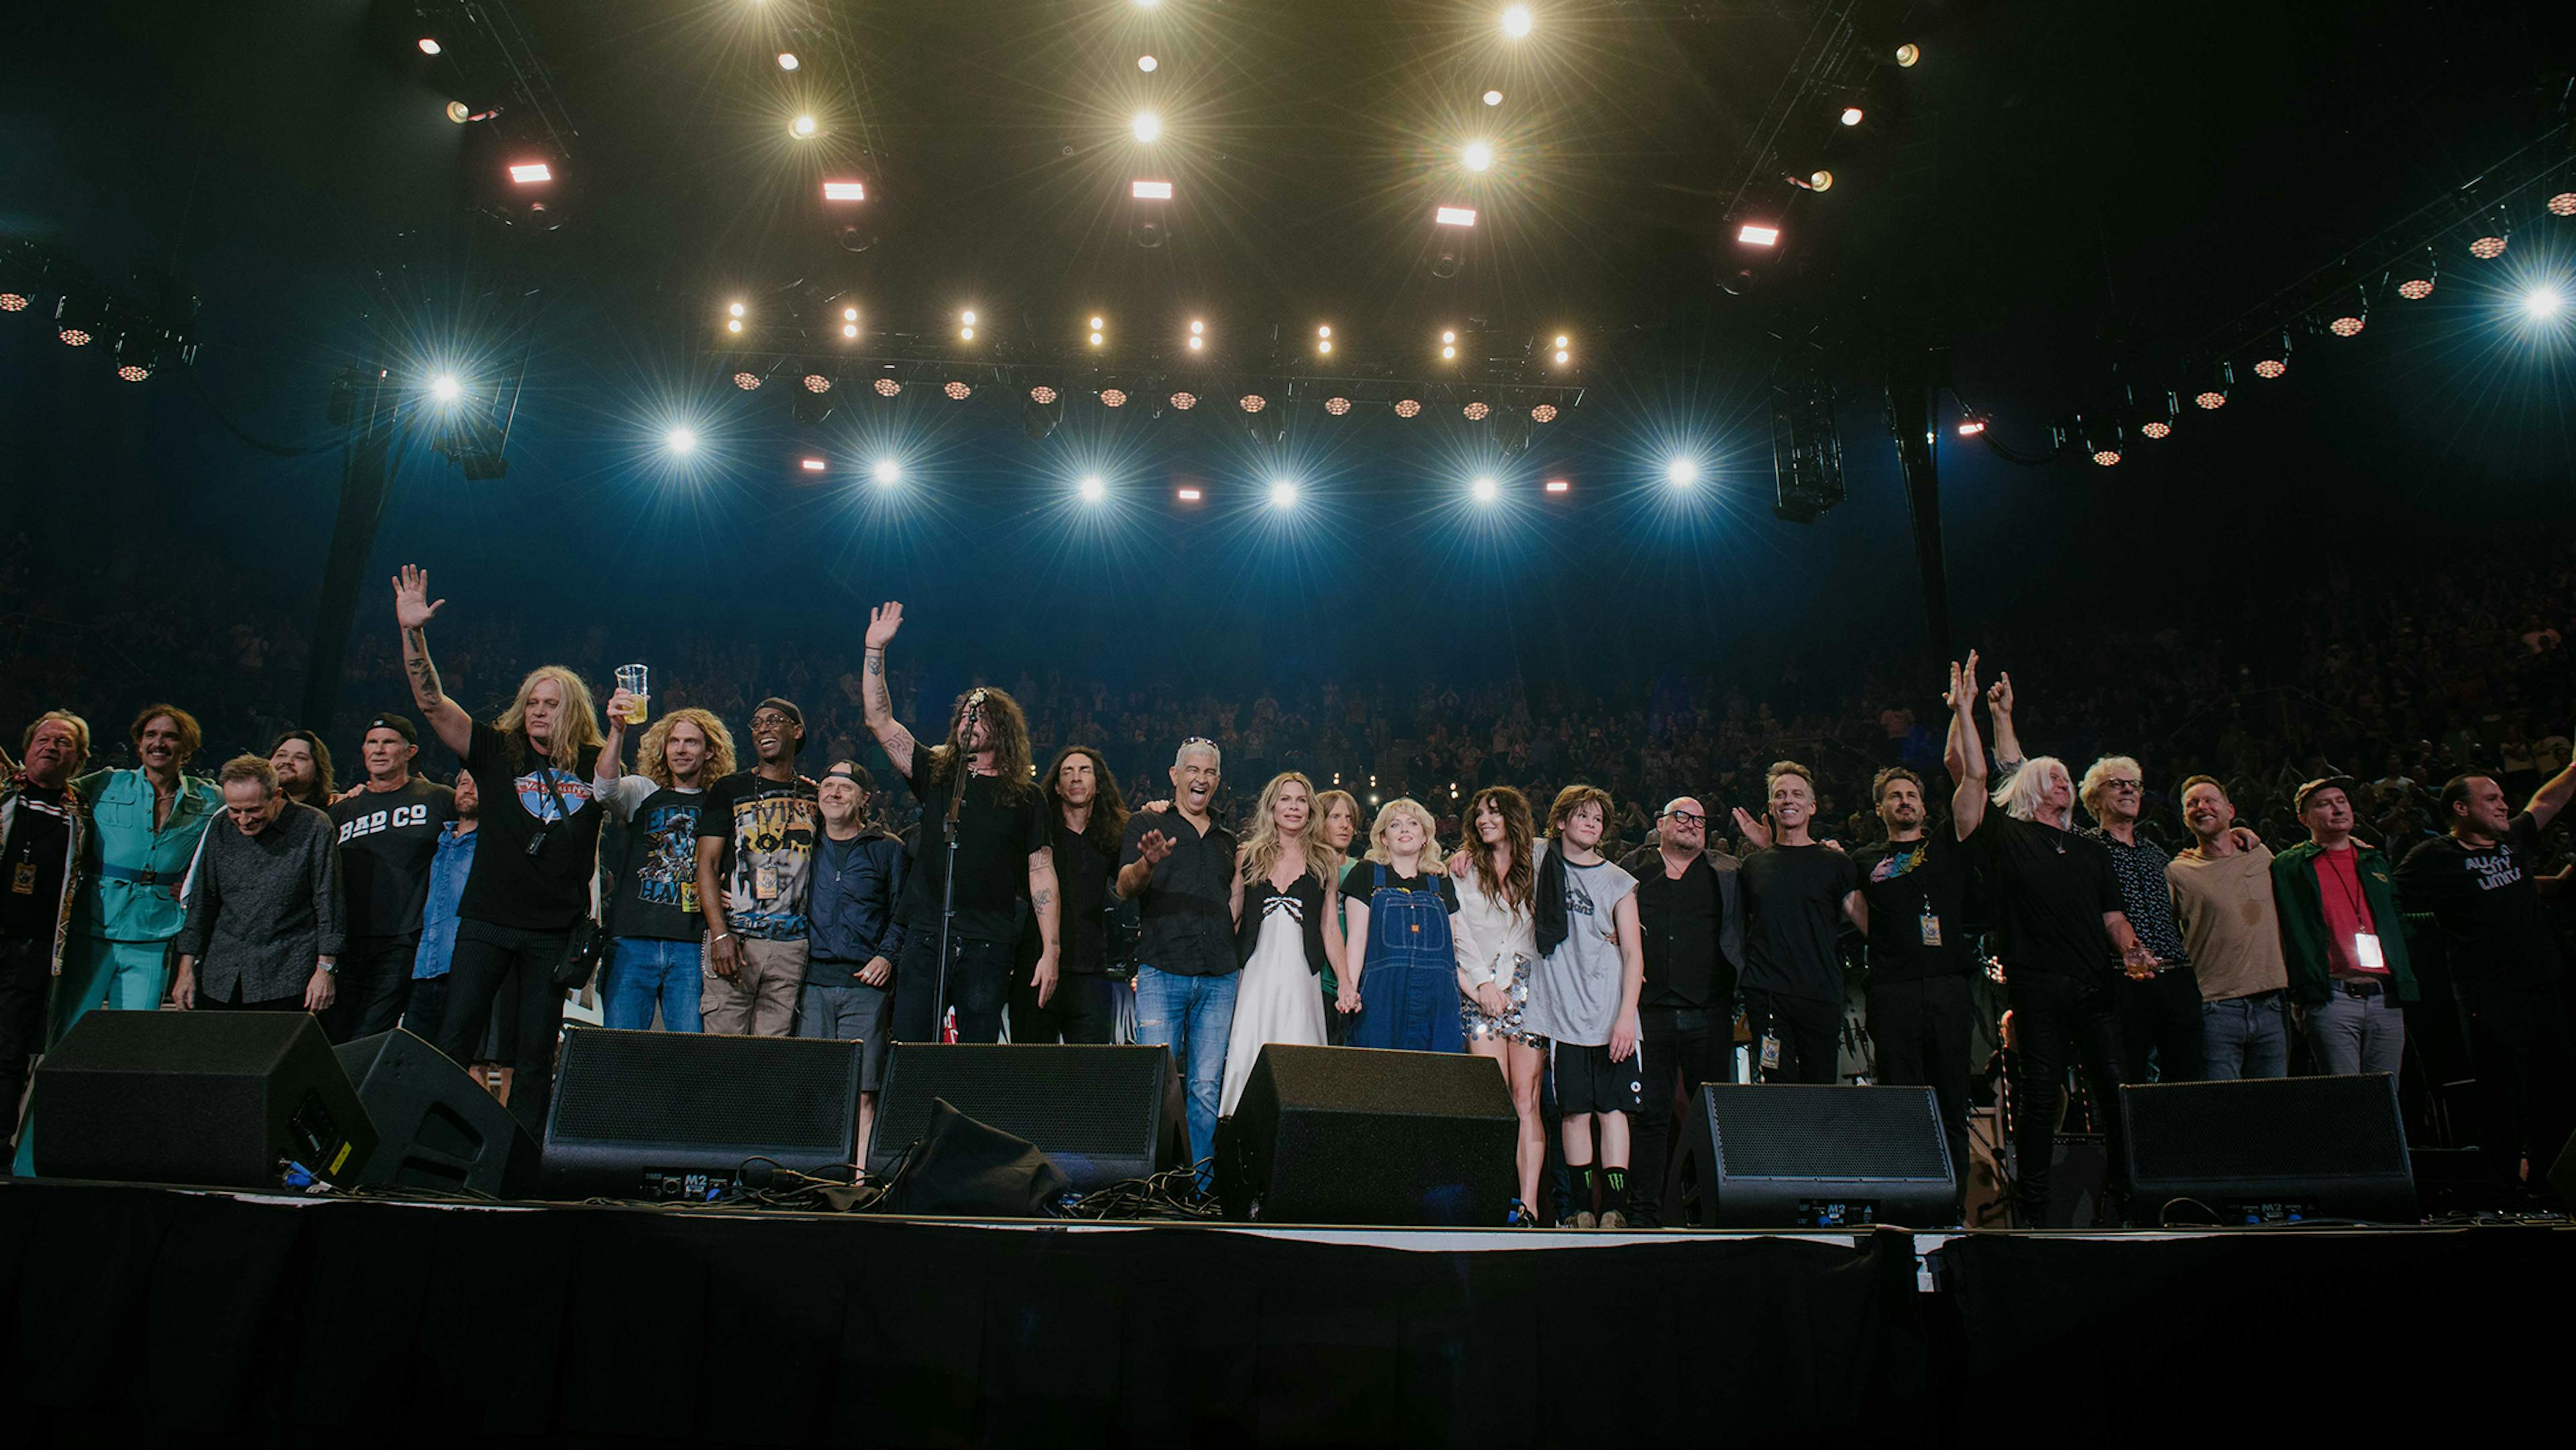 In pictures: The Taylor Hawkins Tribute Concert in Los Angeles